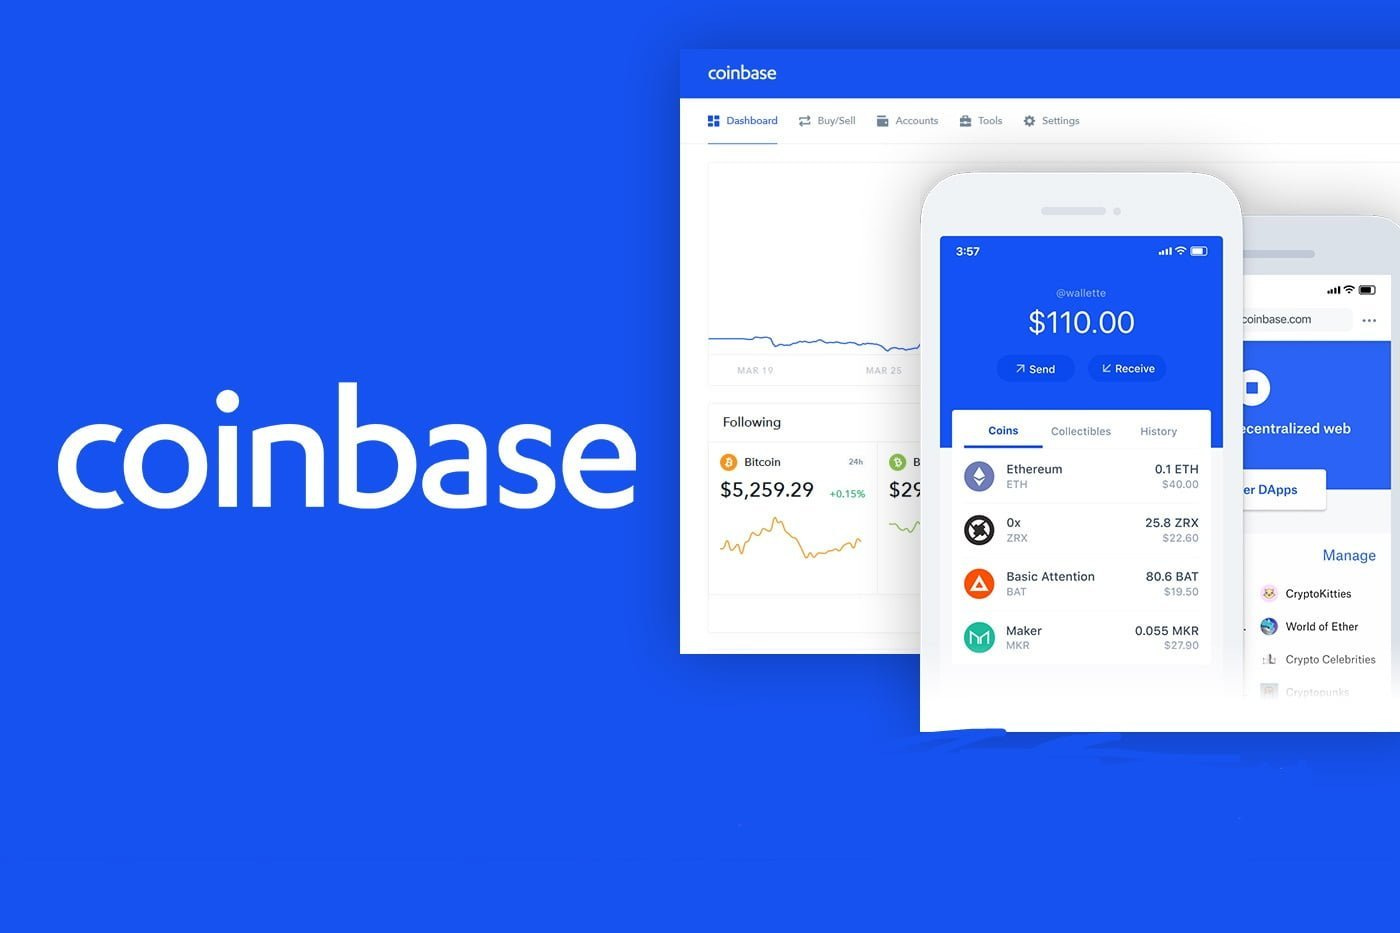 18 New Cryptocurrencies Supported By Coinbase - Bitcoinik